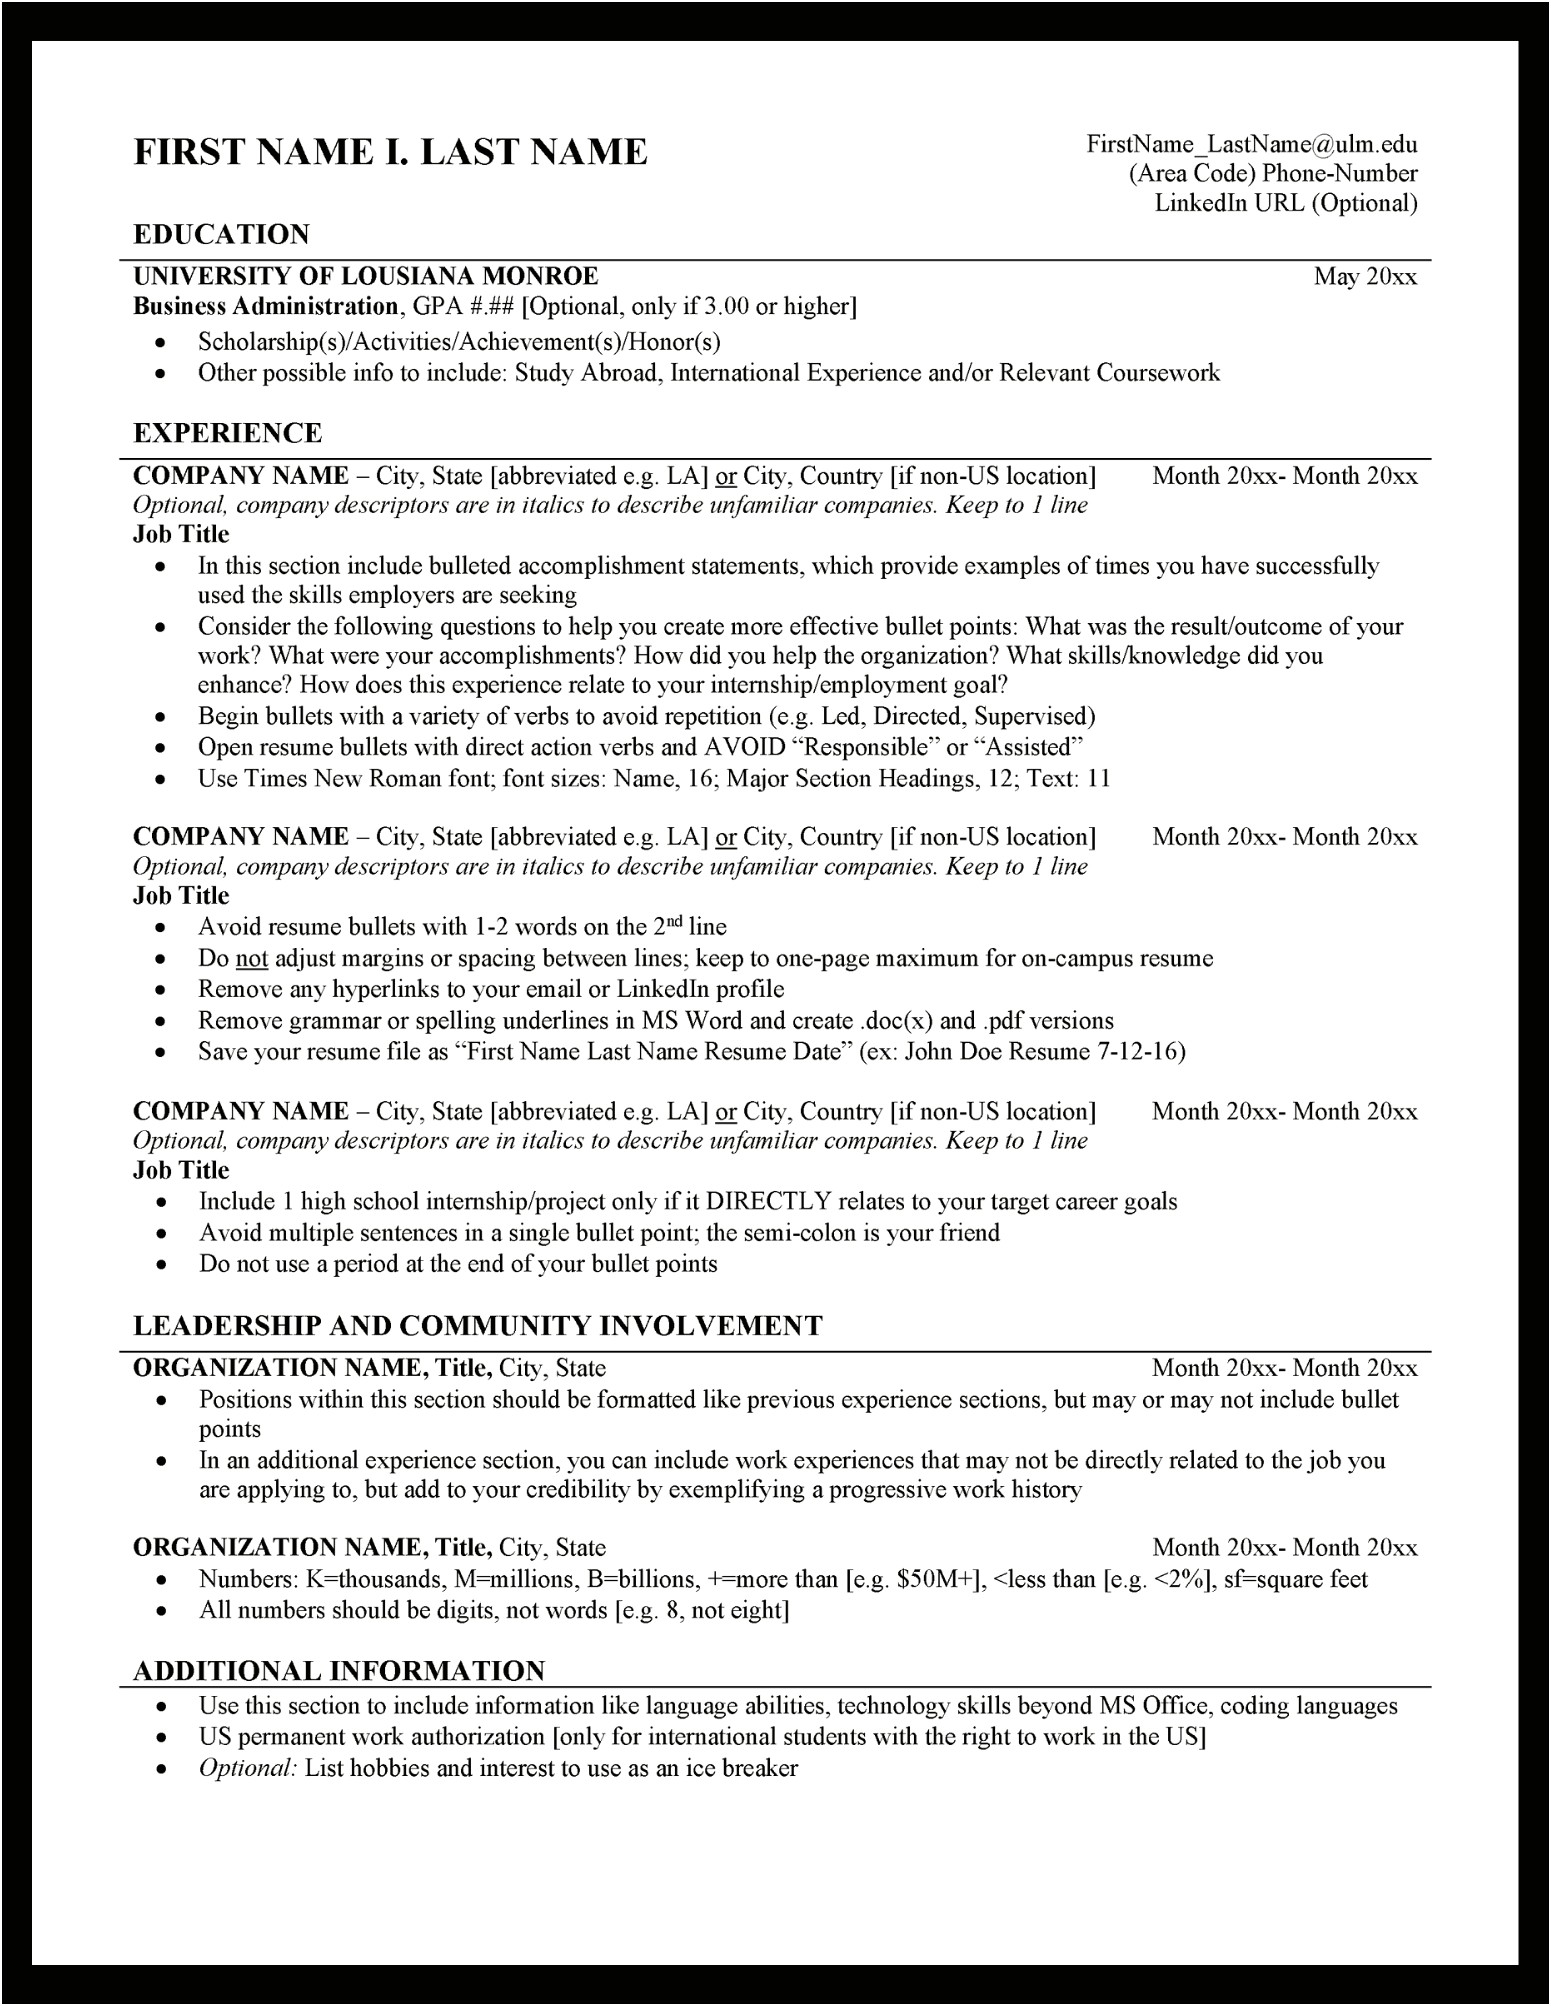 Authorized To Work For Any Us Employer Resume